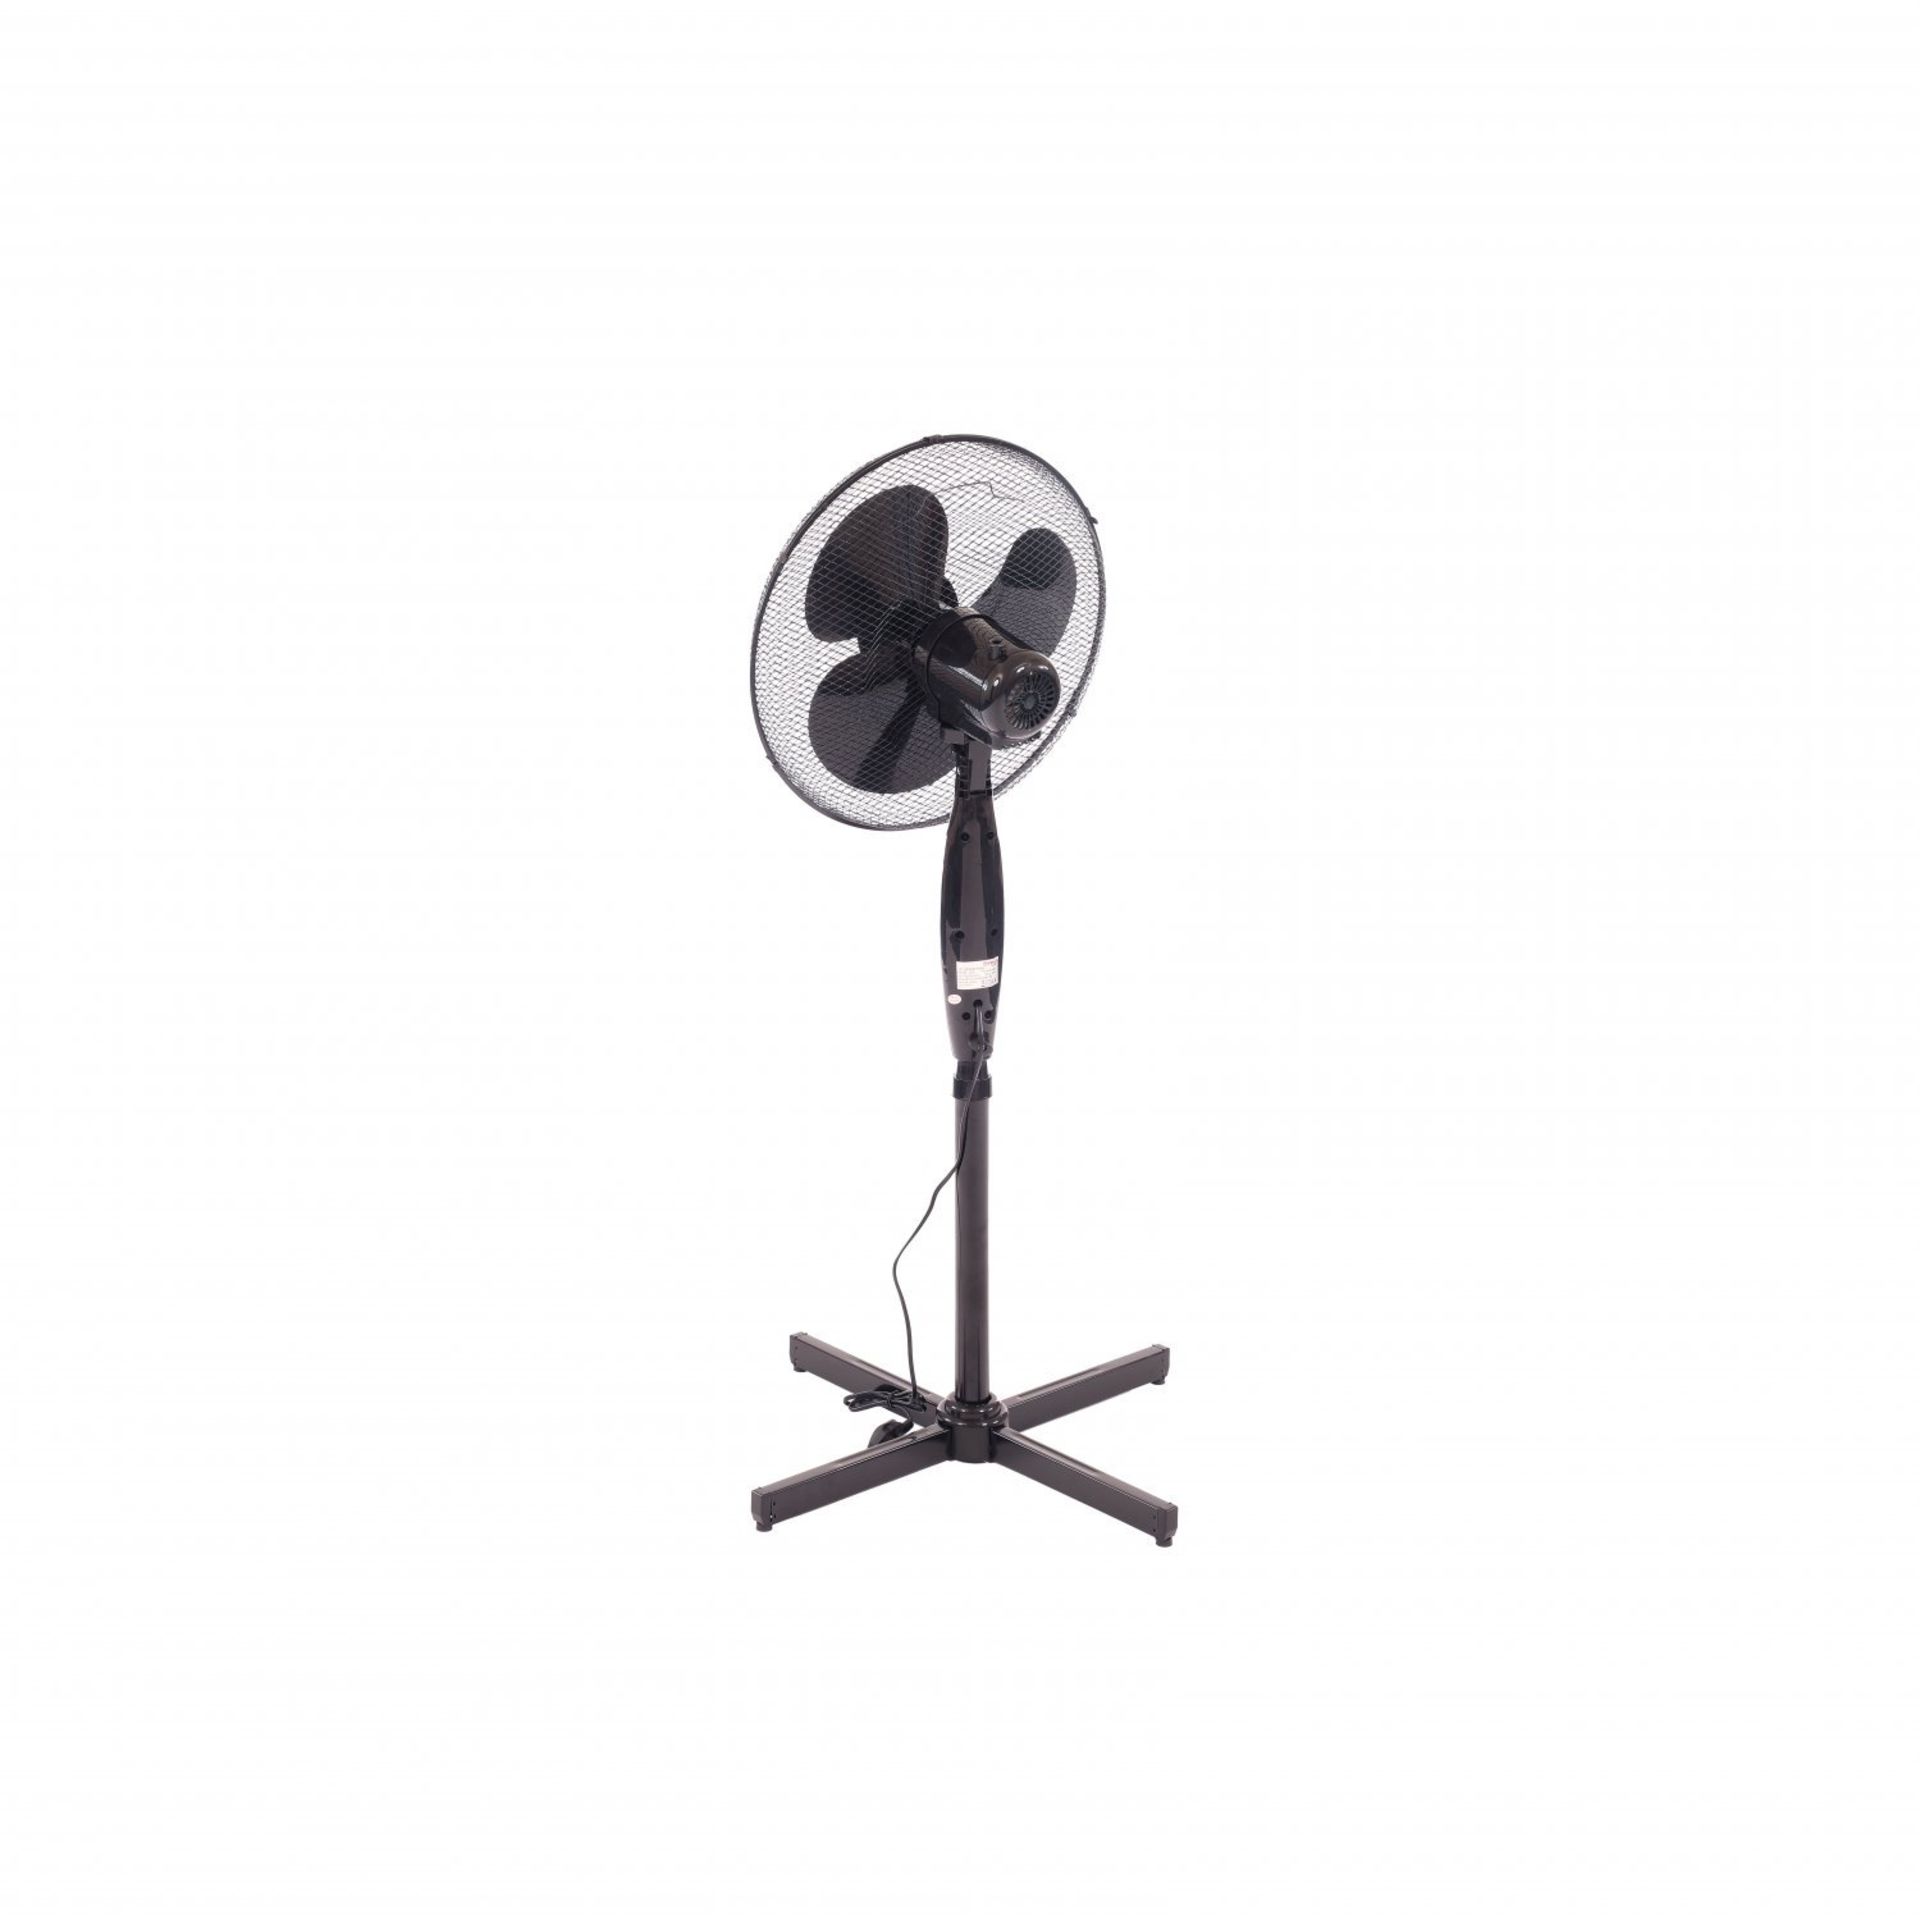 (KK10) 16" Oscillating Black Extendable Free Standing Tower Pedestal Cooling Fan The fan h... - Image 2 of 2